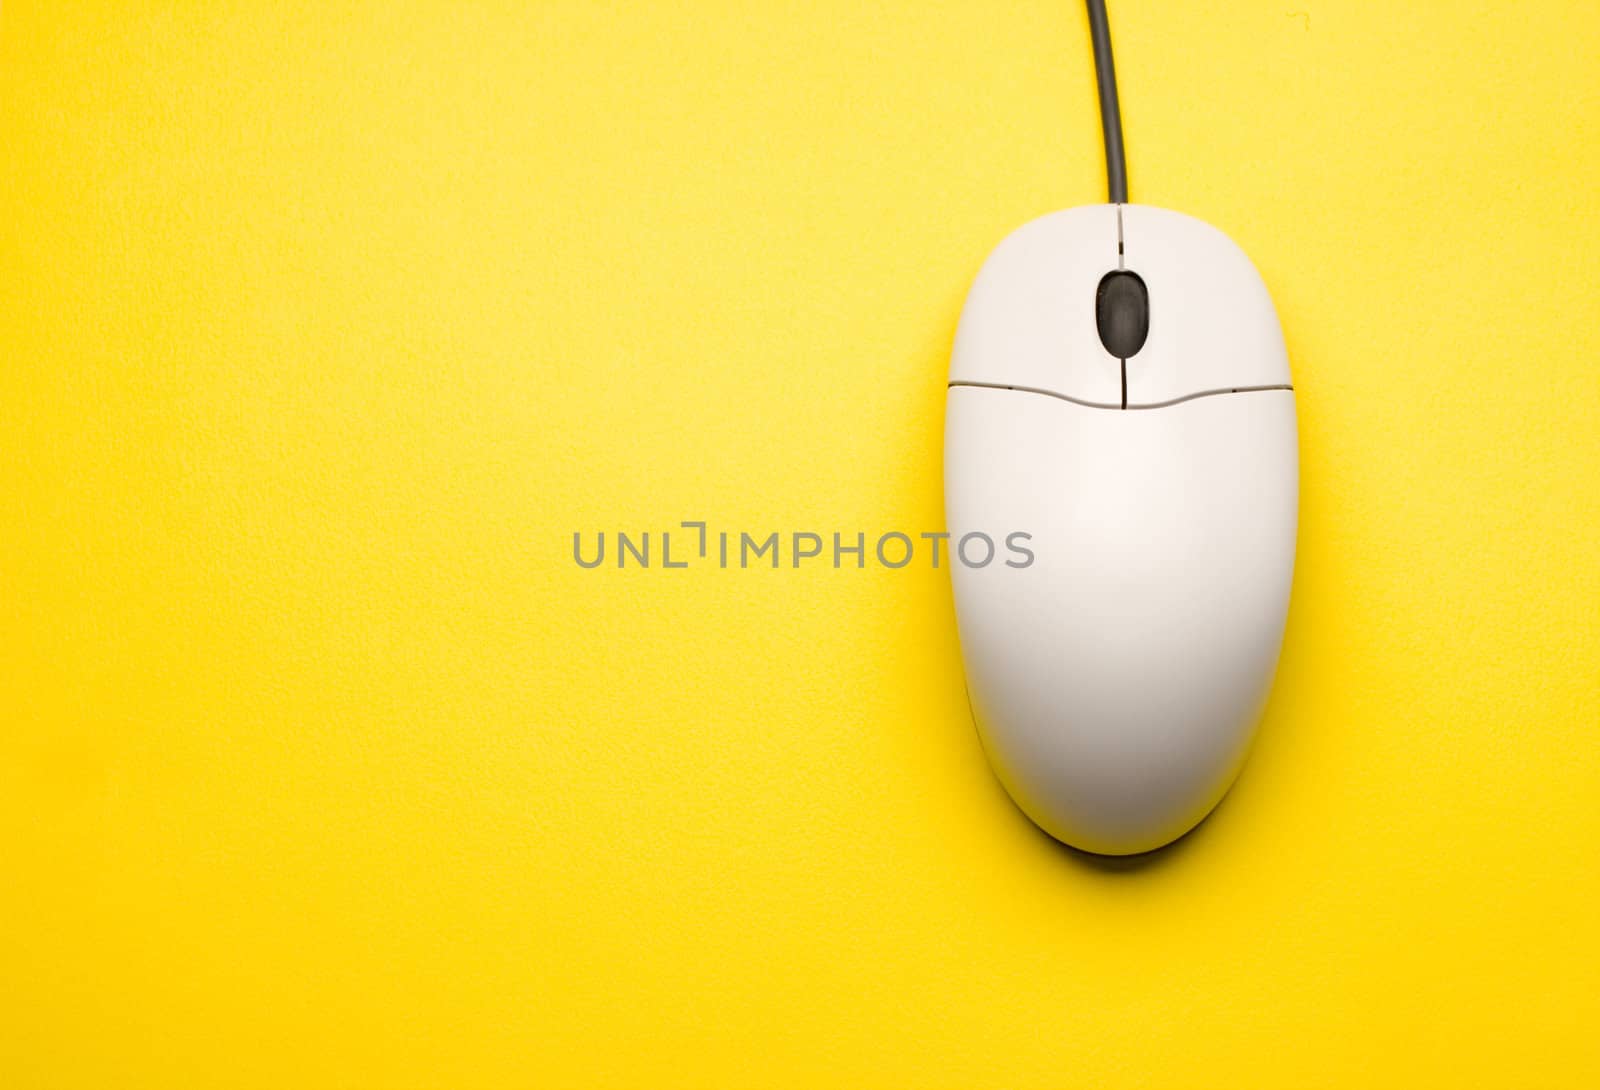 Computer mouse isolated on the yellow background